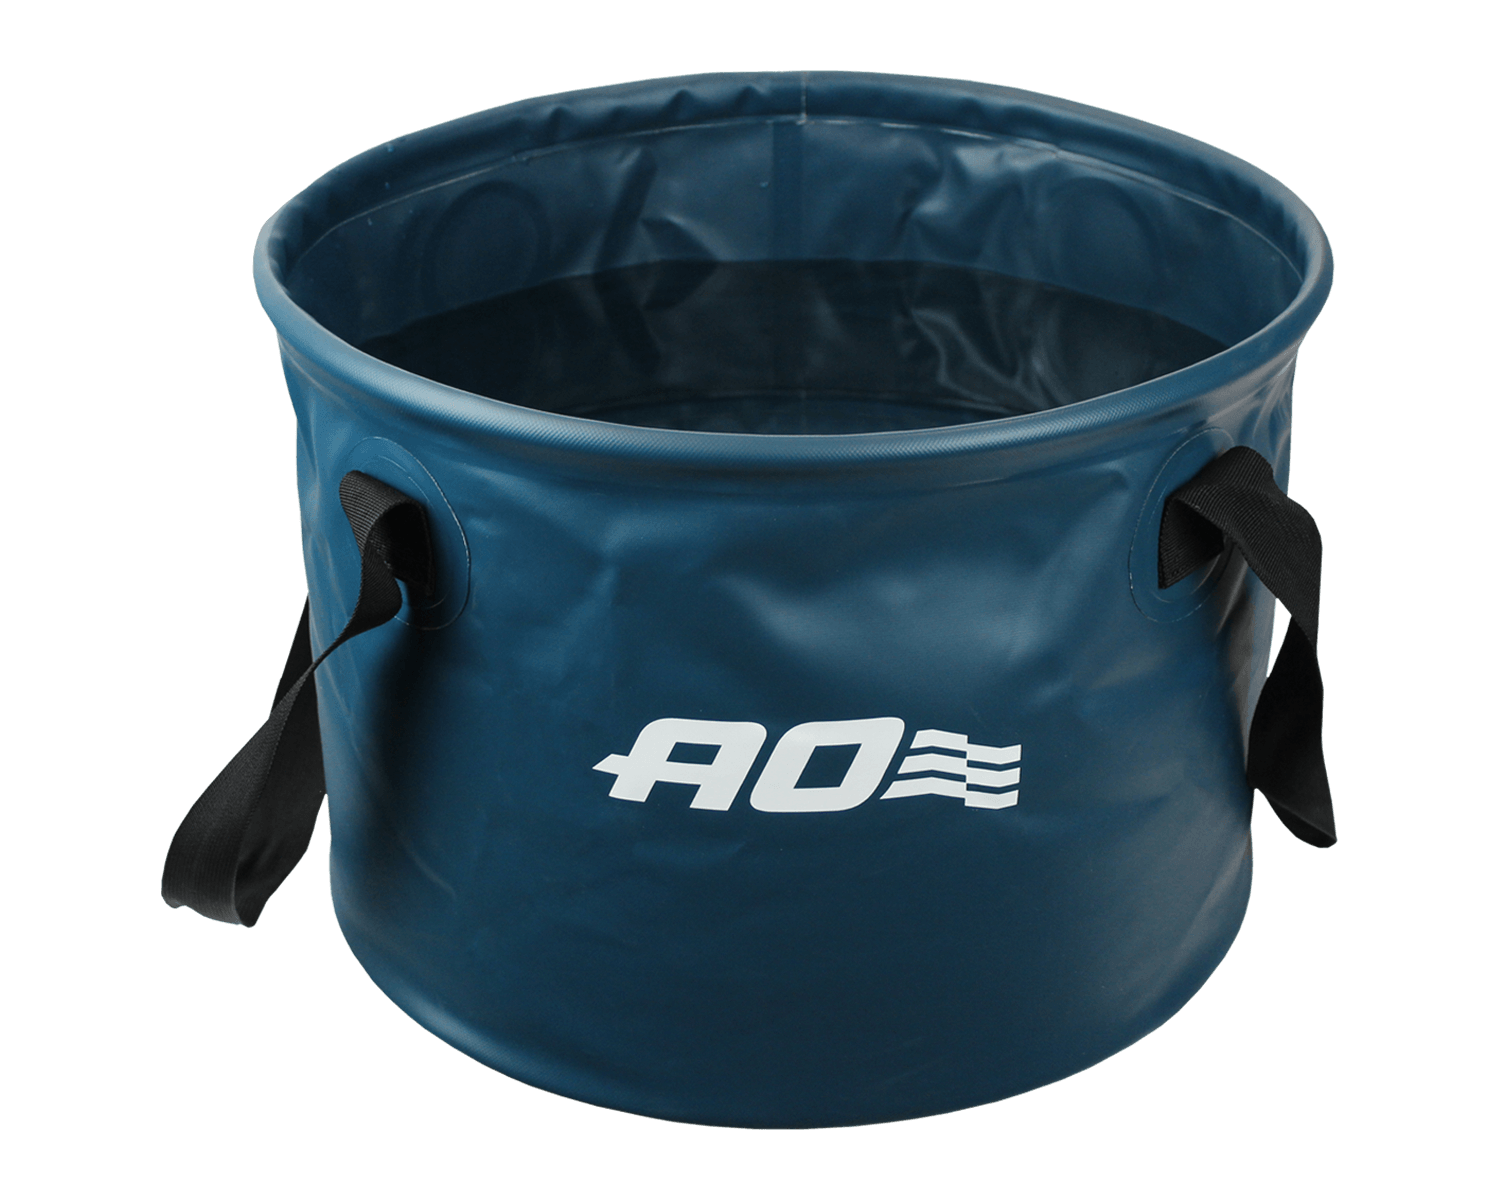 Top Race Foldable Pail Bucket Silicone Collapsible Buckets Multi Purpose 2 Liter